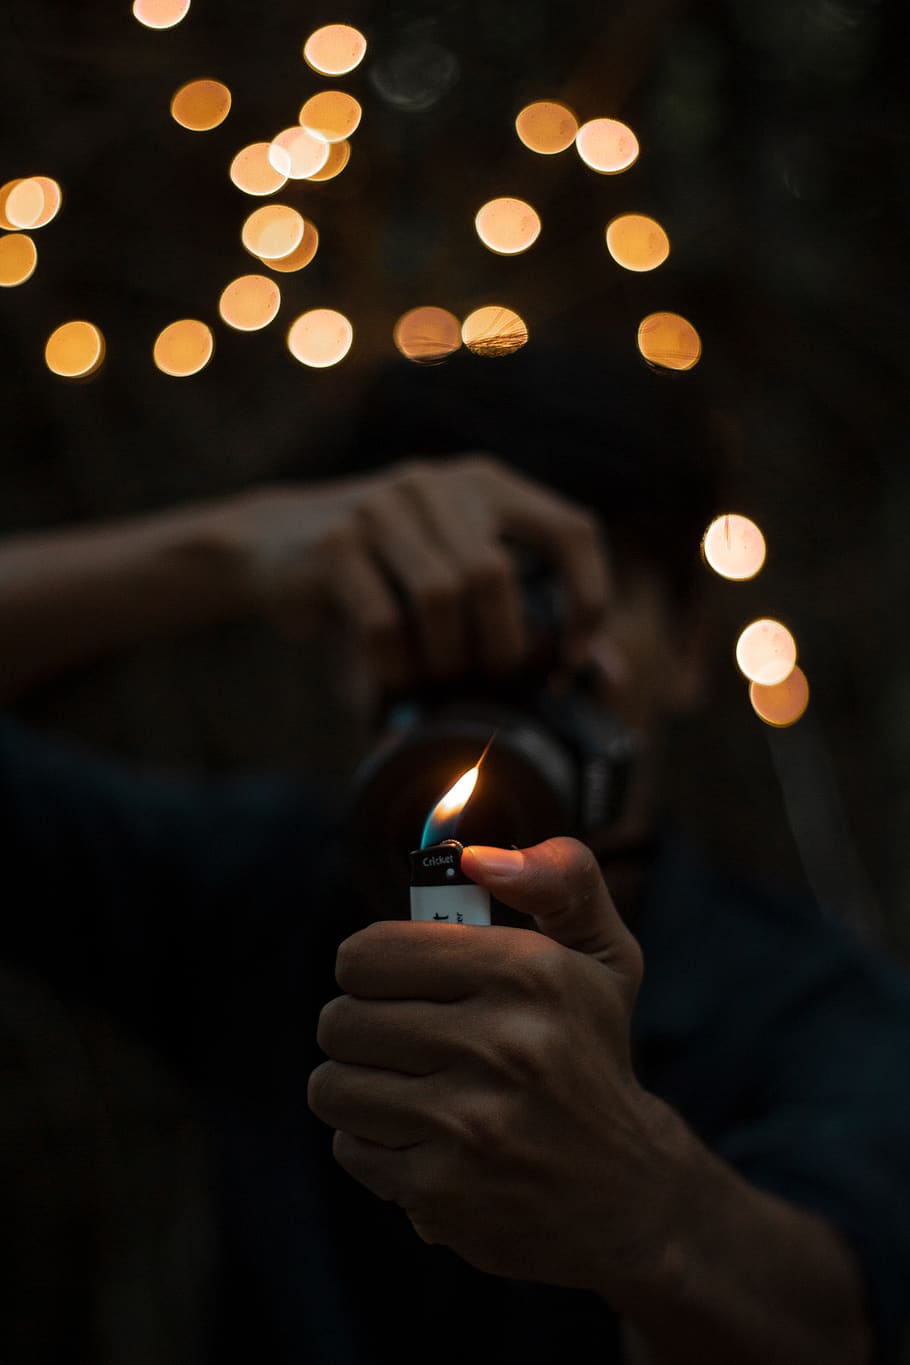 HD wallpaper: Person Holding Lighted Disposable Lighter, flame, hand, macro